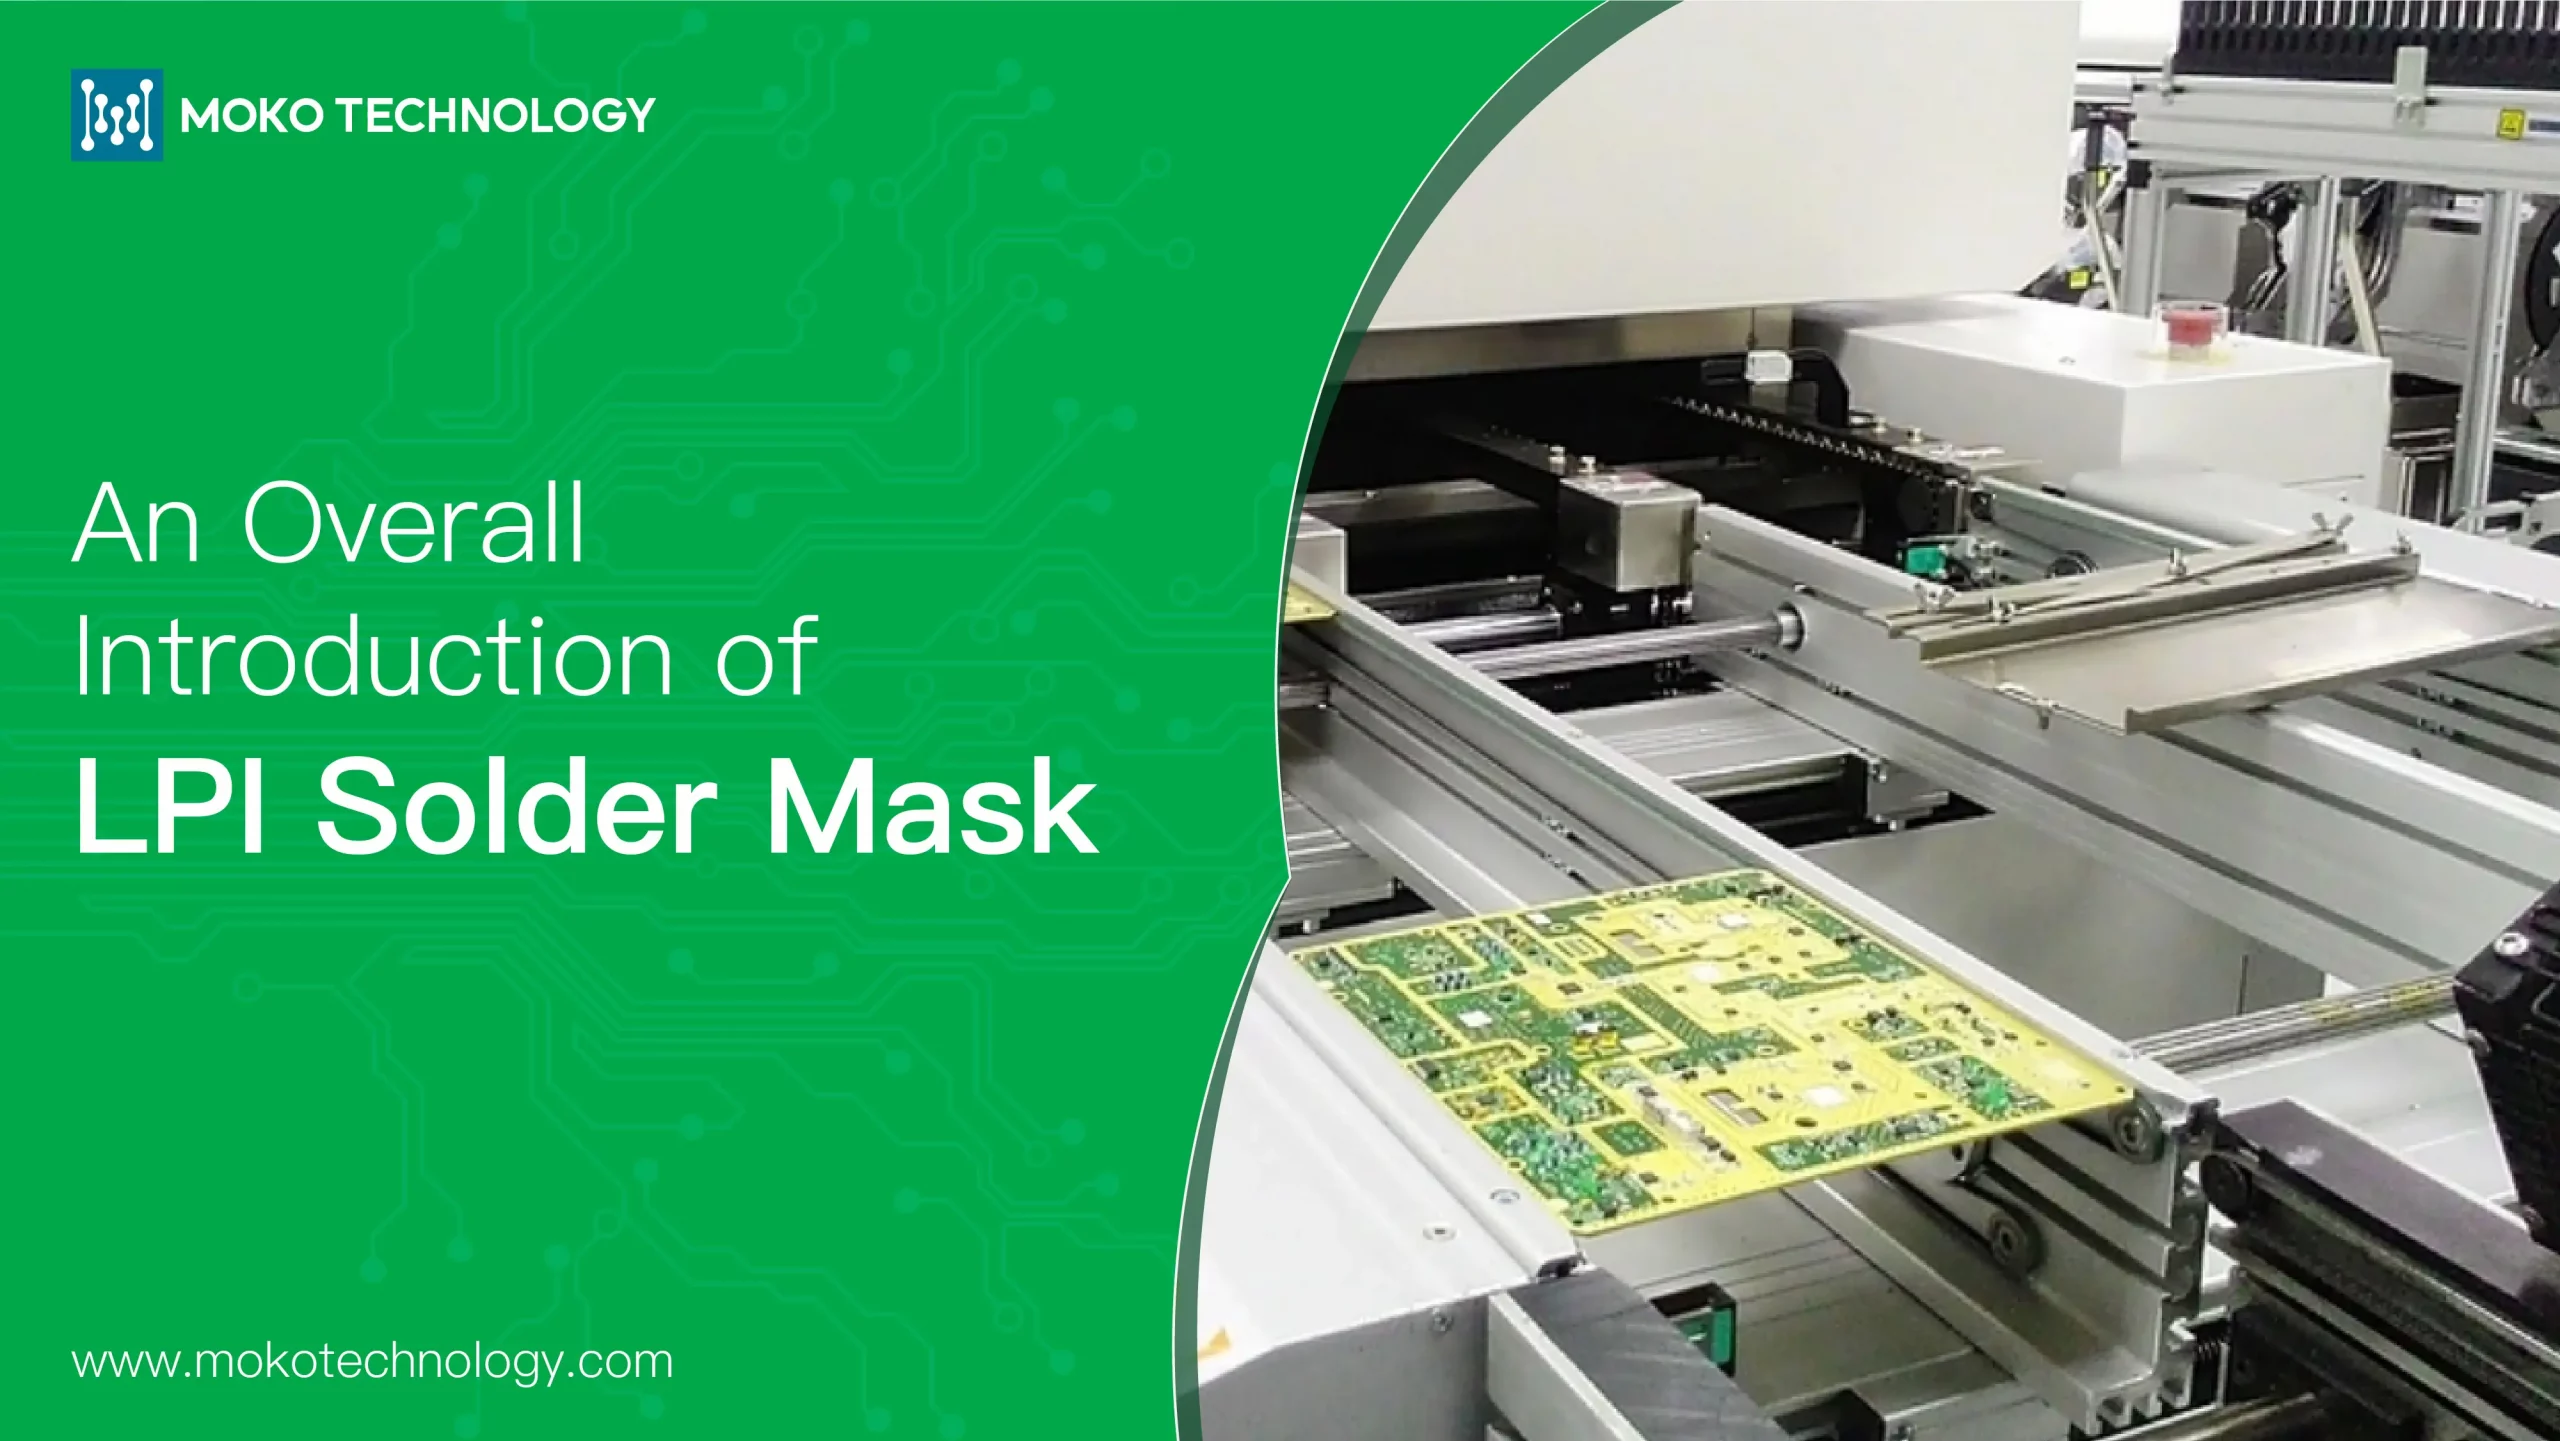 An Overall Introduction of LPI Solder Mask